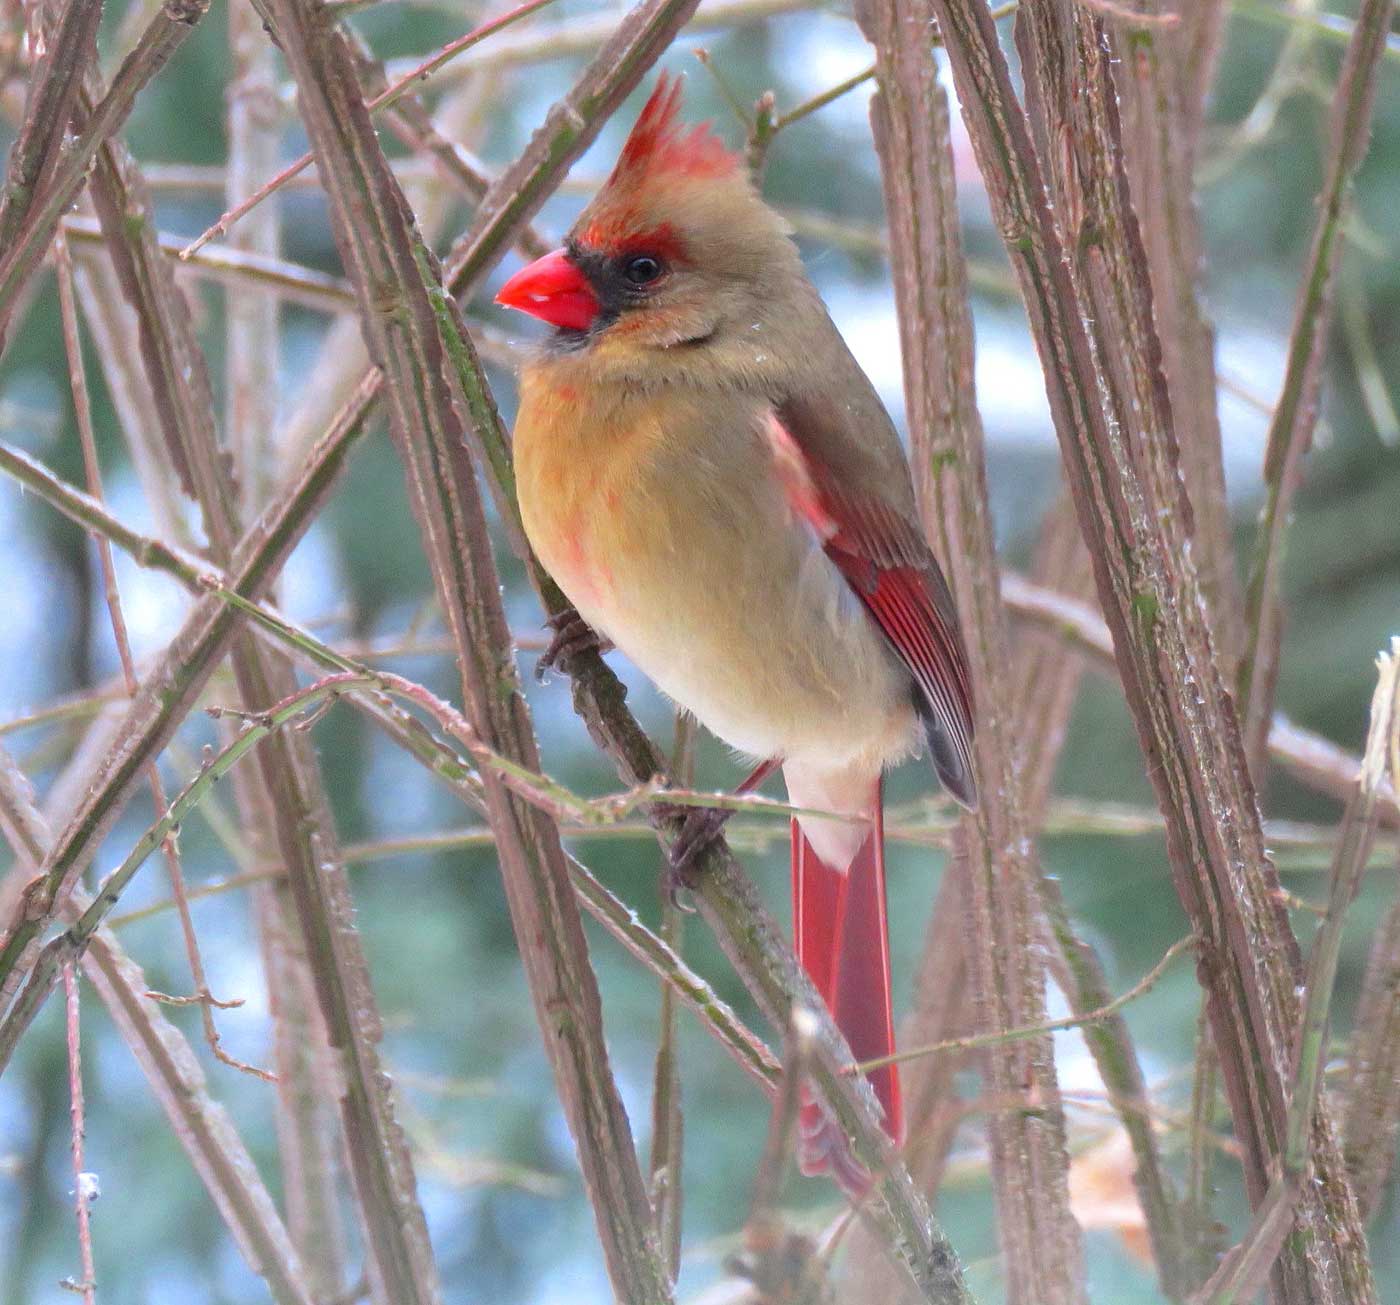 Female cardinal sitting on branch in bush with snow in background